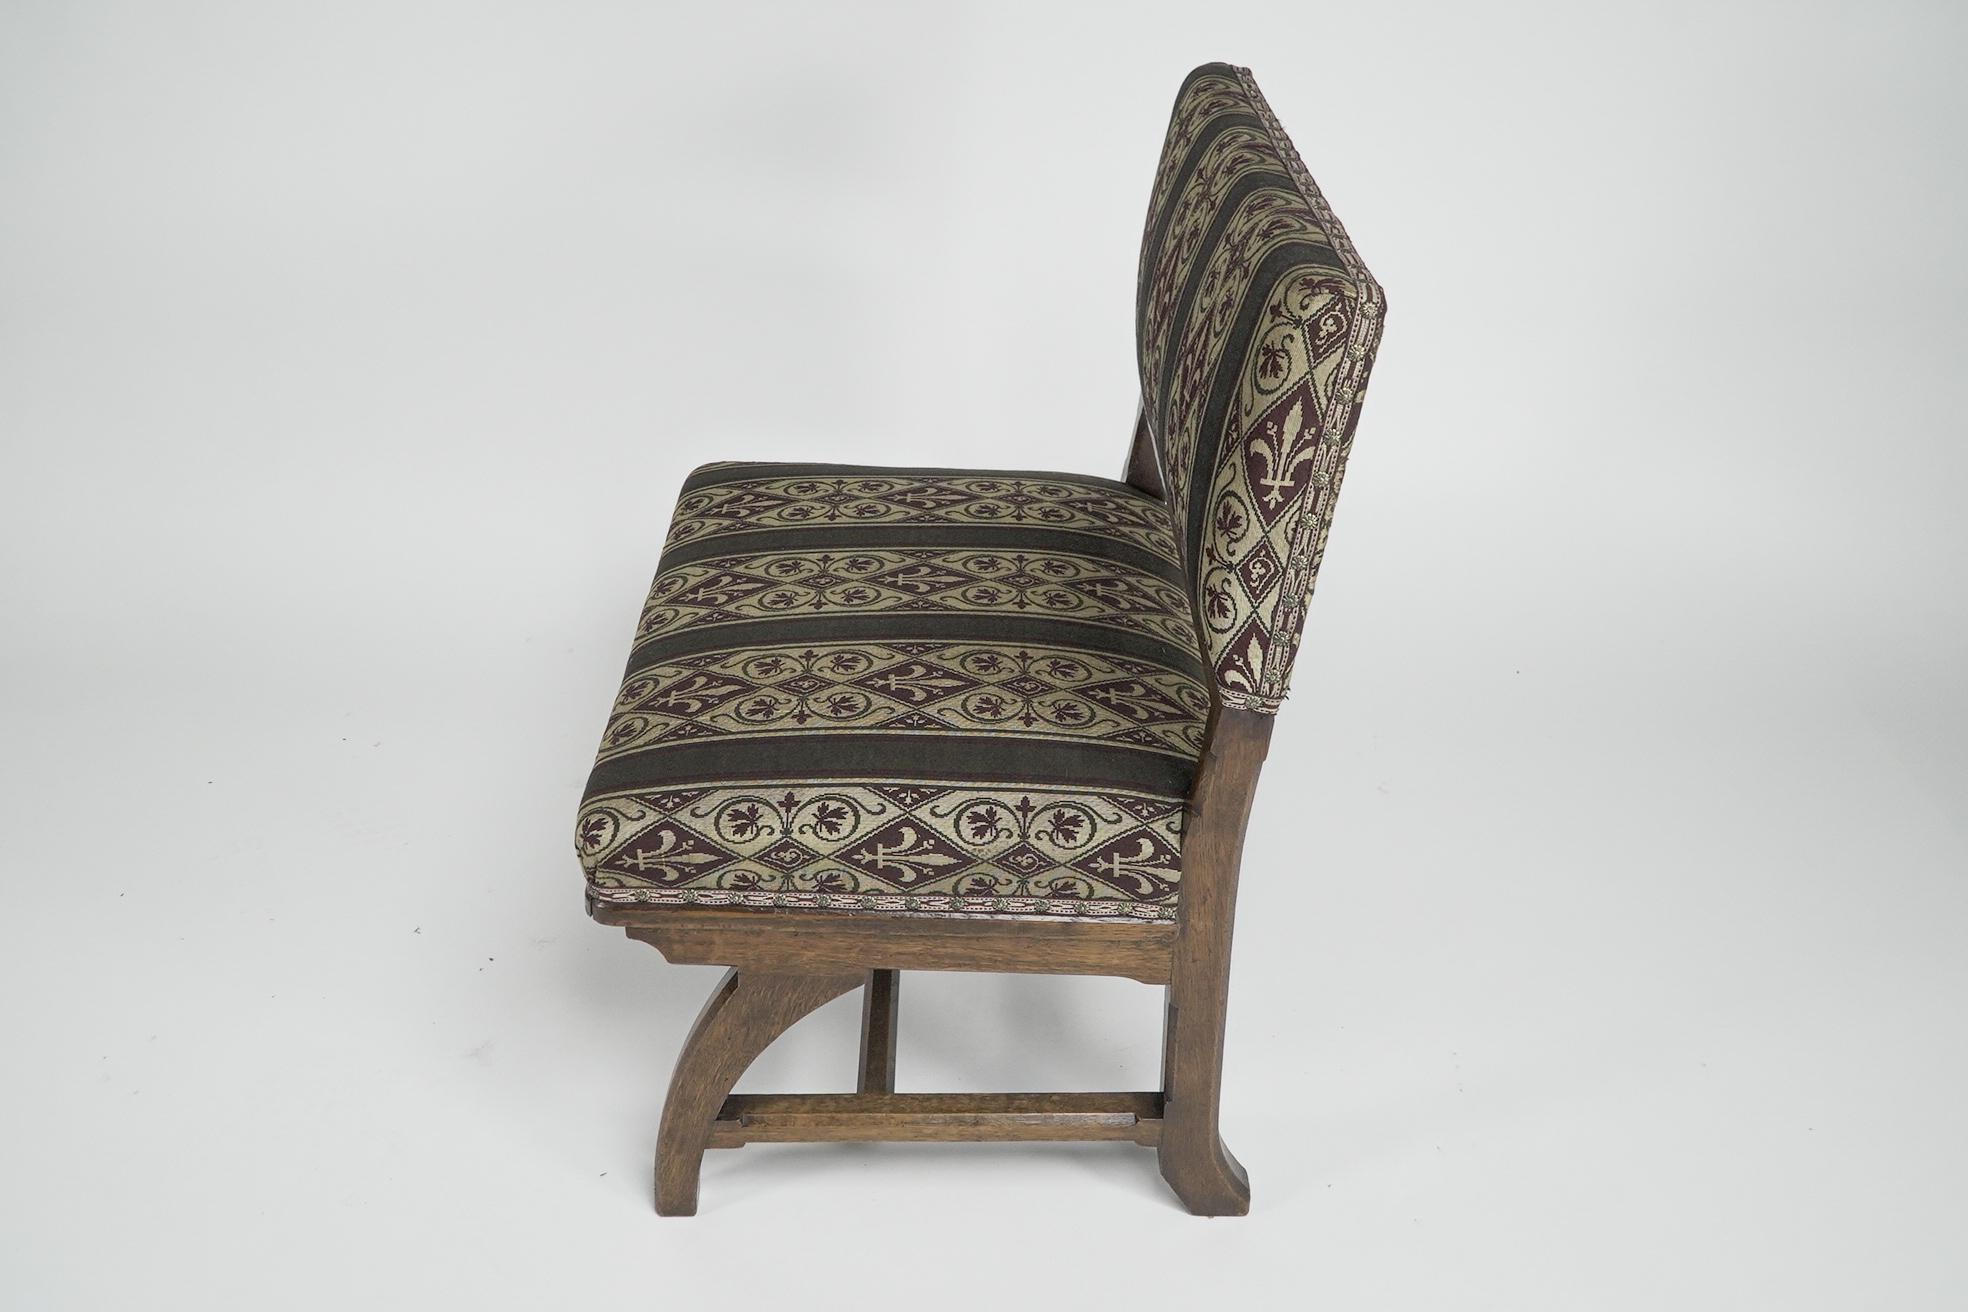 Late 19th Century E W Pugin attri. A Gothic Revival oak duet chair with a wider than usual seat. For Sale